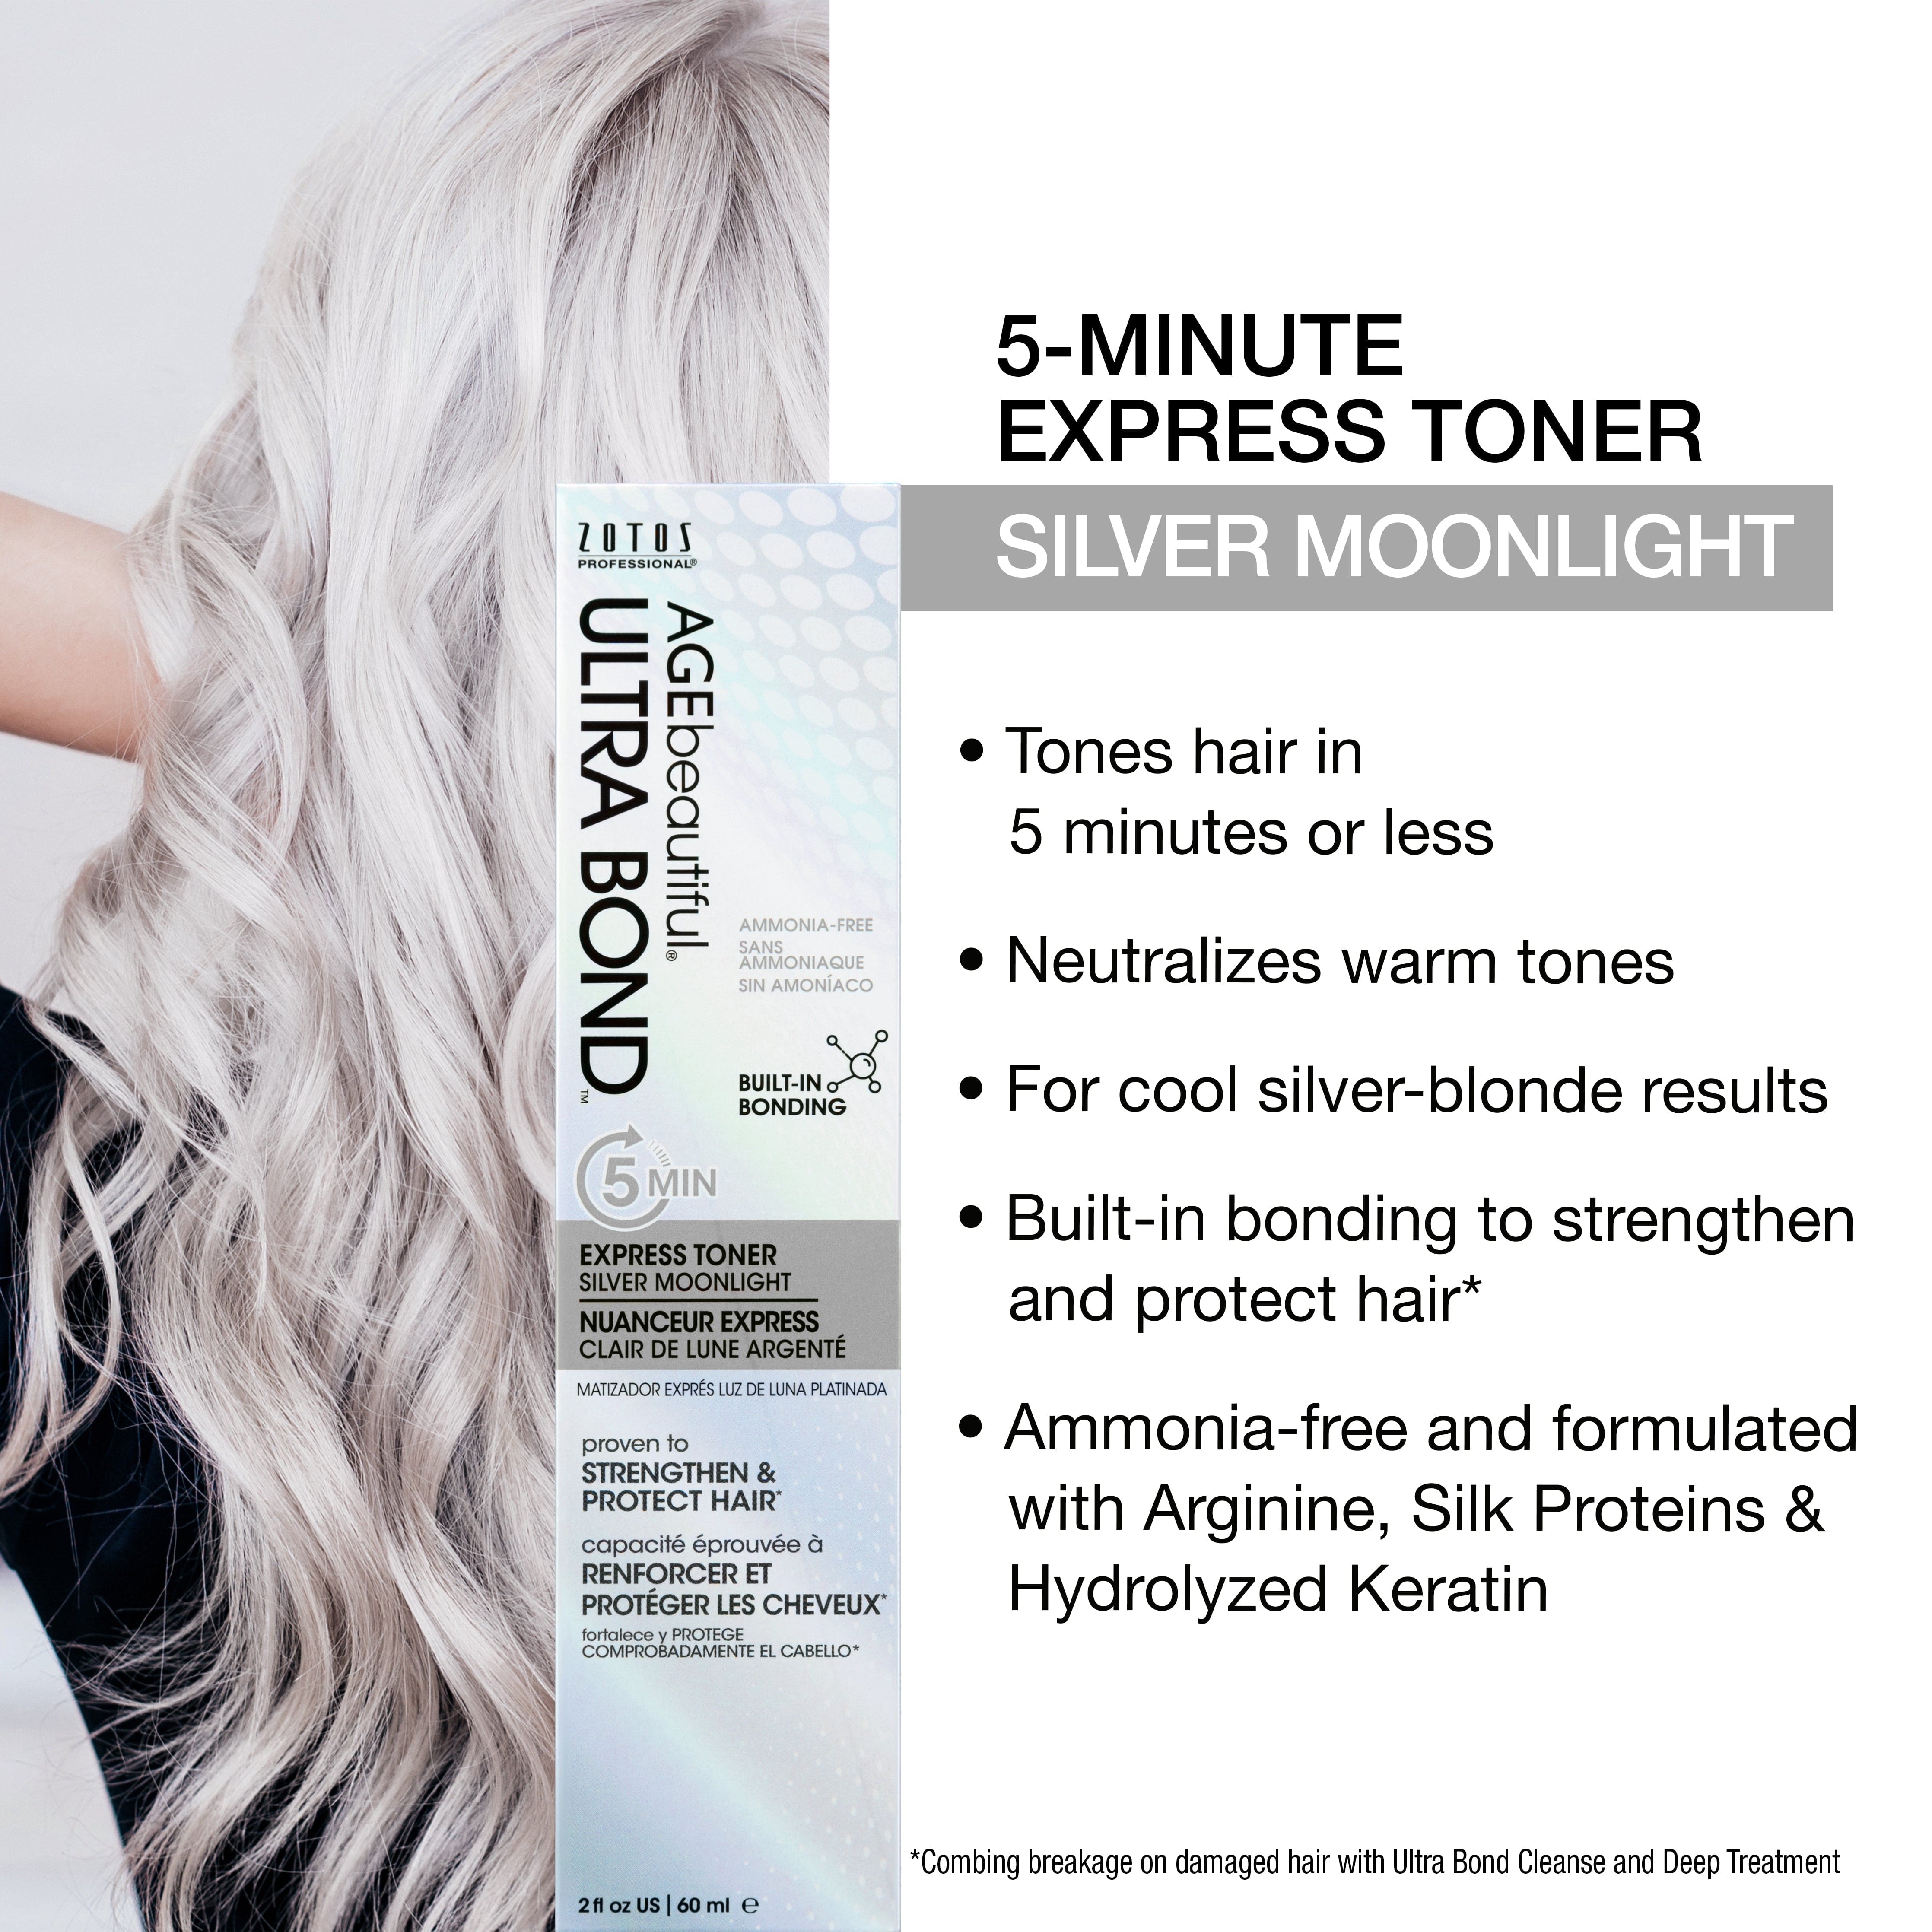 Silver moonlight tones hair in 5 minutes or less, neutralizing warm tones for cool silver-blonde results. Built in bonding to strengthen and protect hair. Ammonia-free and formulated with Arginine, Silk Proteins and Hydrolyzed Keratin.